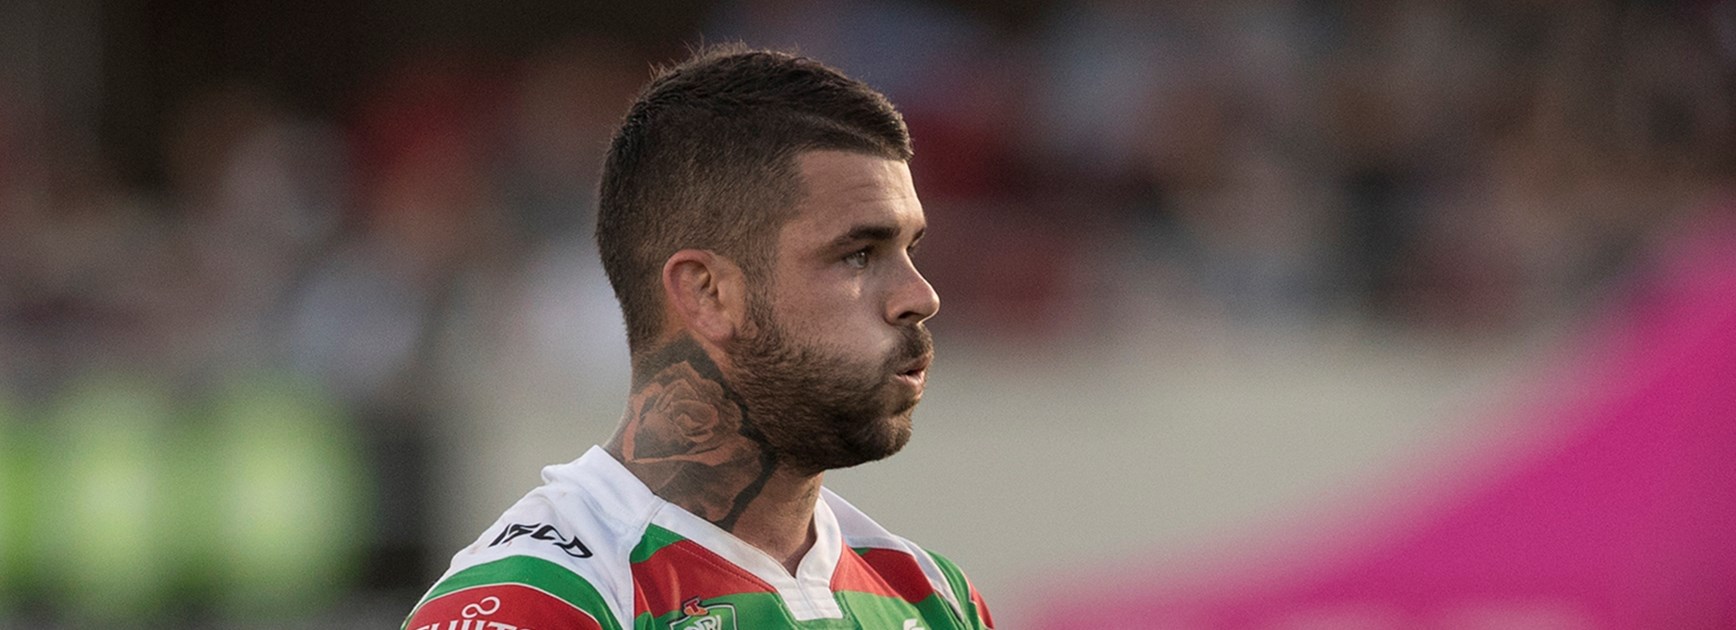 South Sydney halfback Adam Reynolds made an impressive comeback for the Rabbitohs.